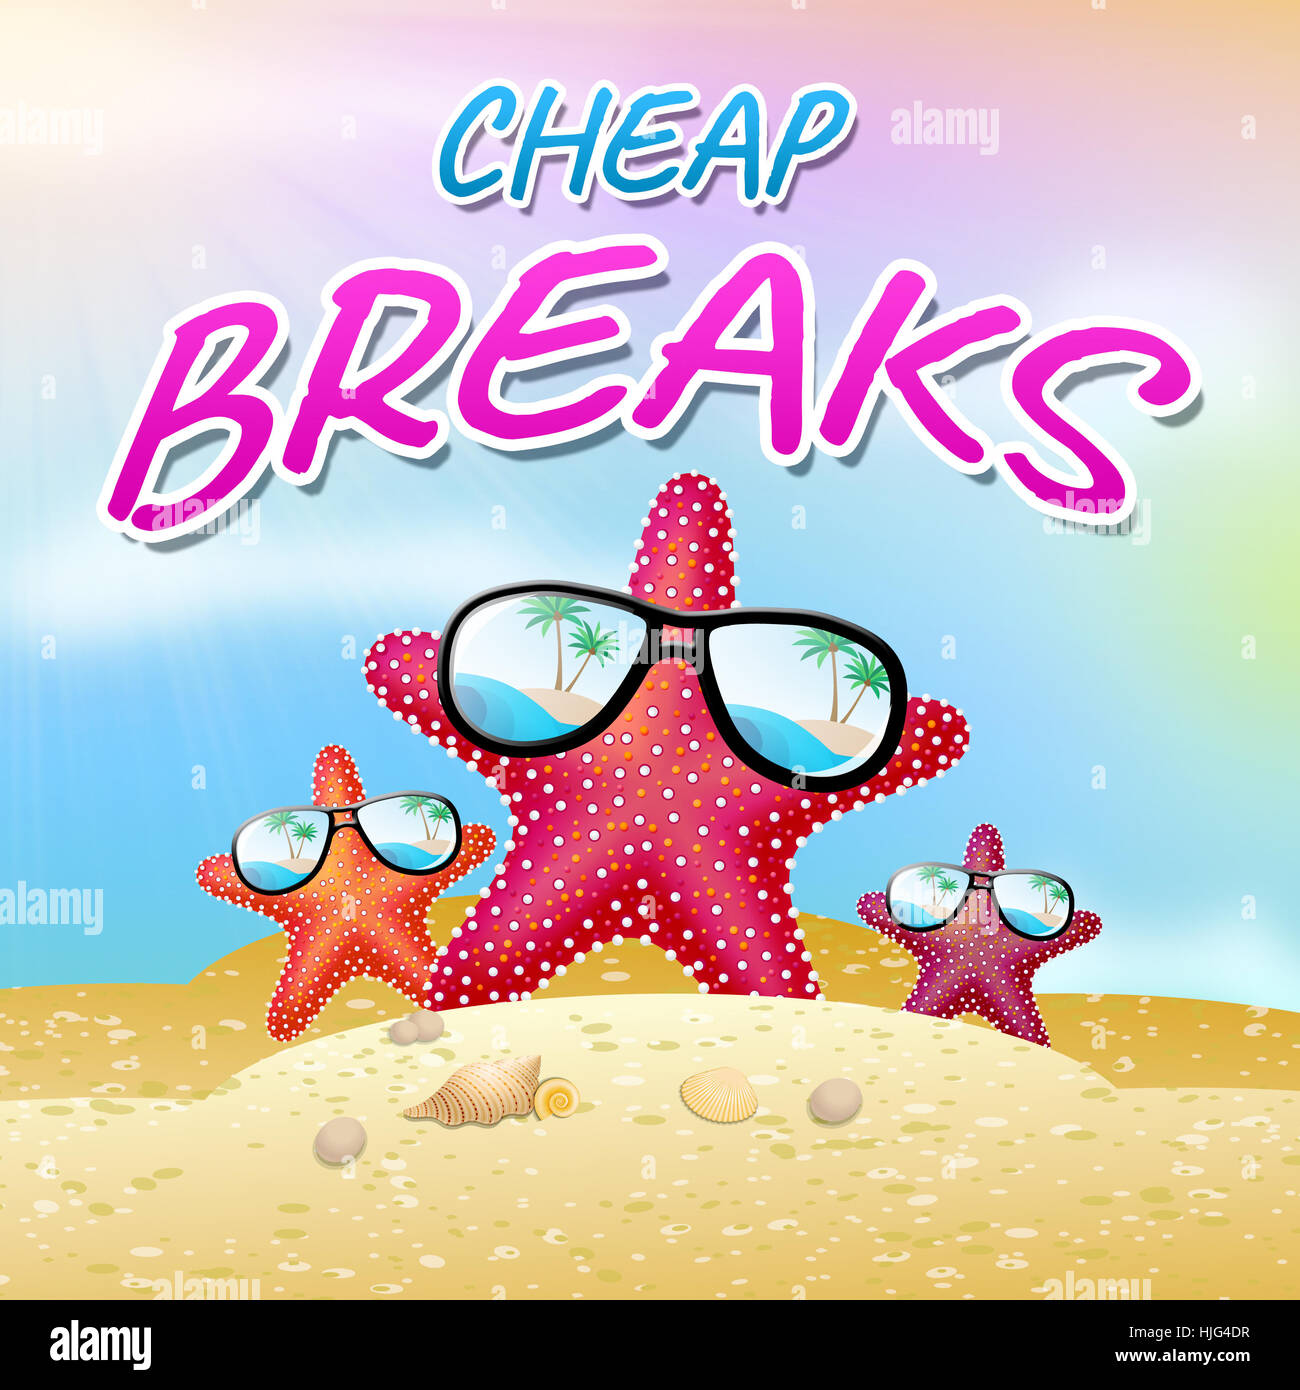 Cheap Breaks Beach Starfish Means Low Cost 3d Illustration Stock Photo